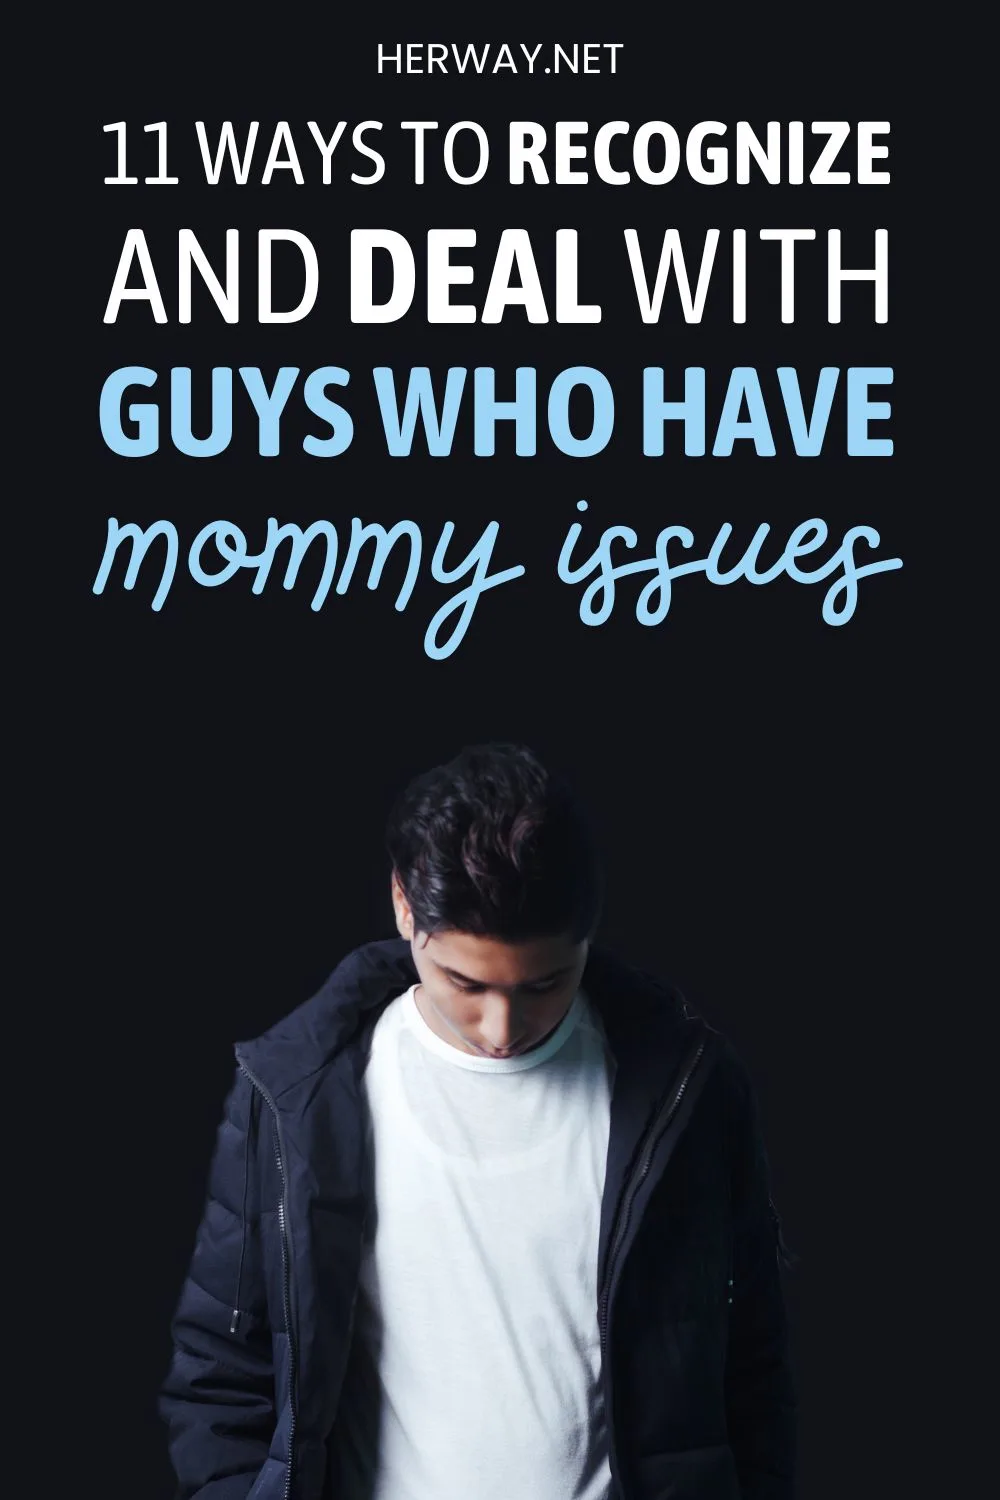 11 Signs Of Guys With Mommy Issues (+ 7 Ways To Deal With Them) Pinterest